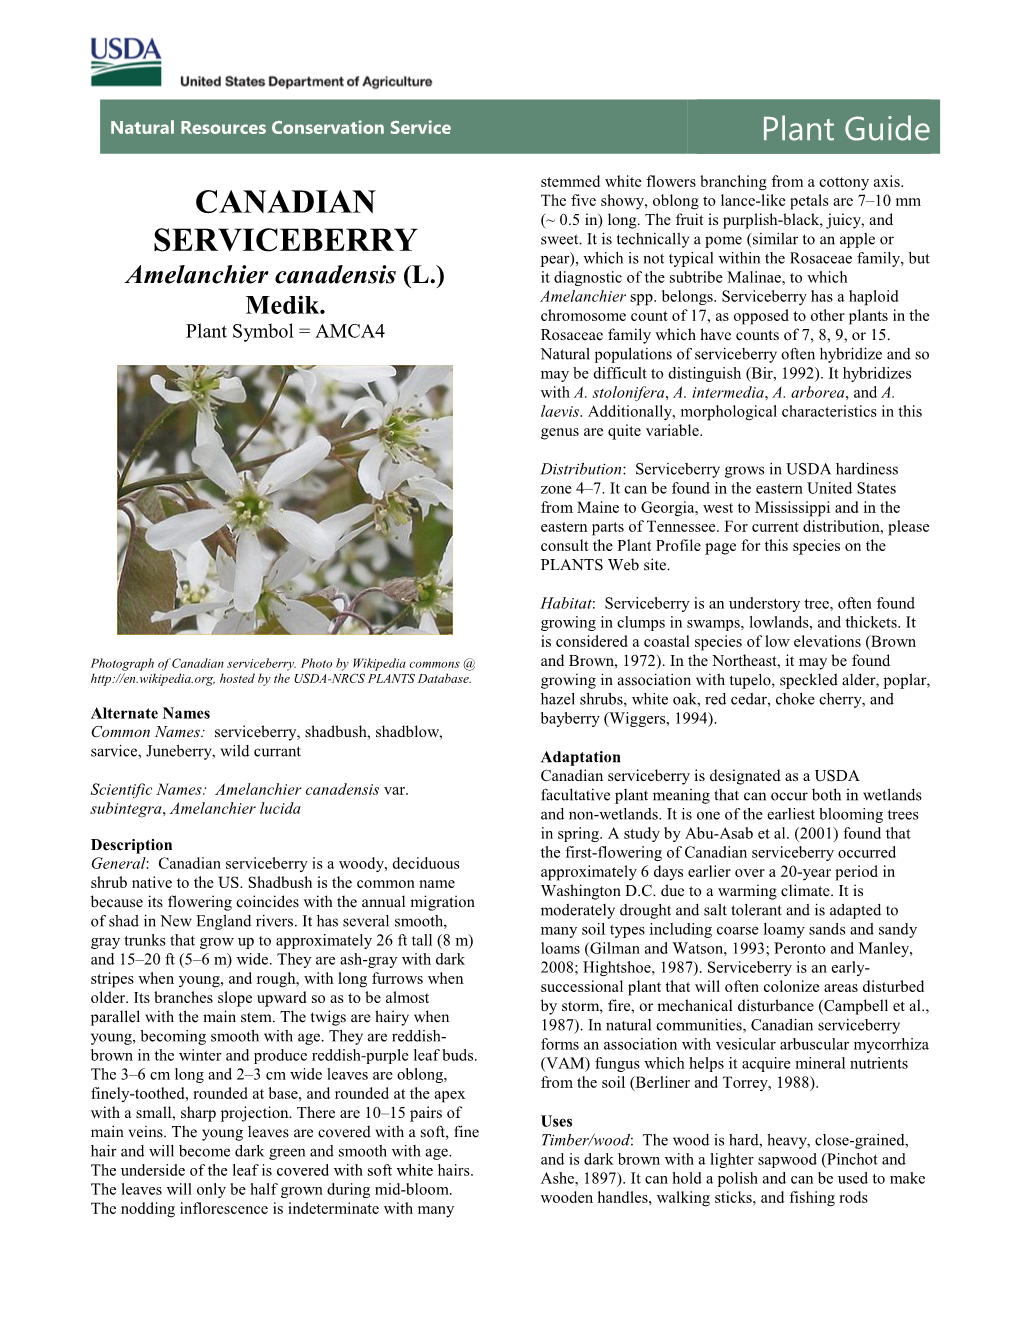 Canadian Serviceberry (Amelanchier Canadensis) Plant Guide